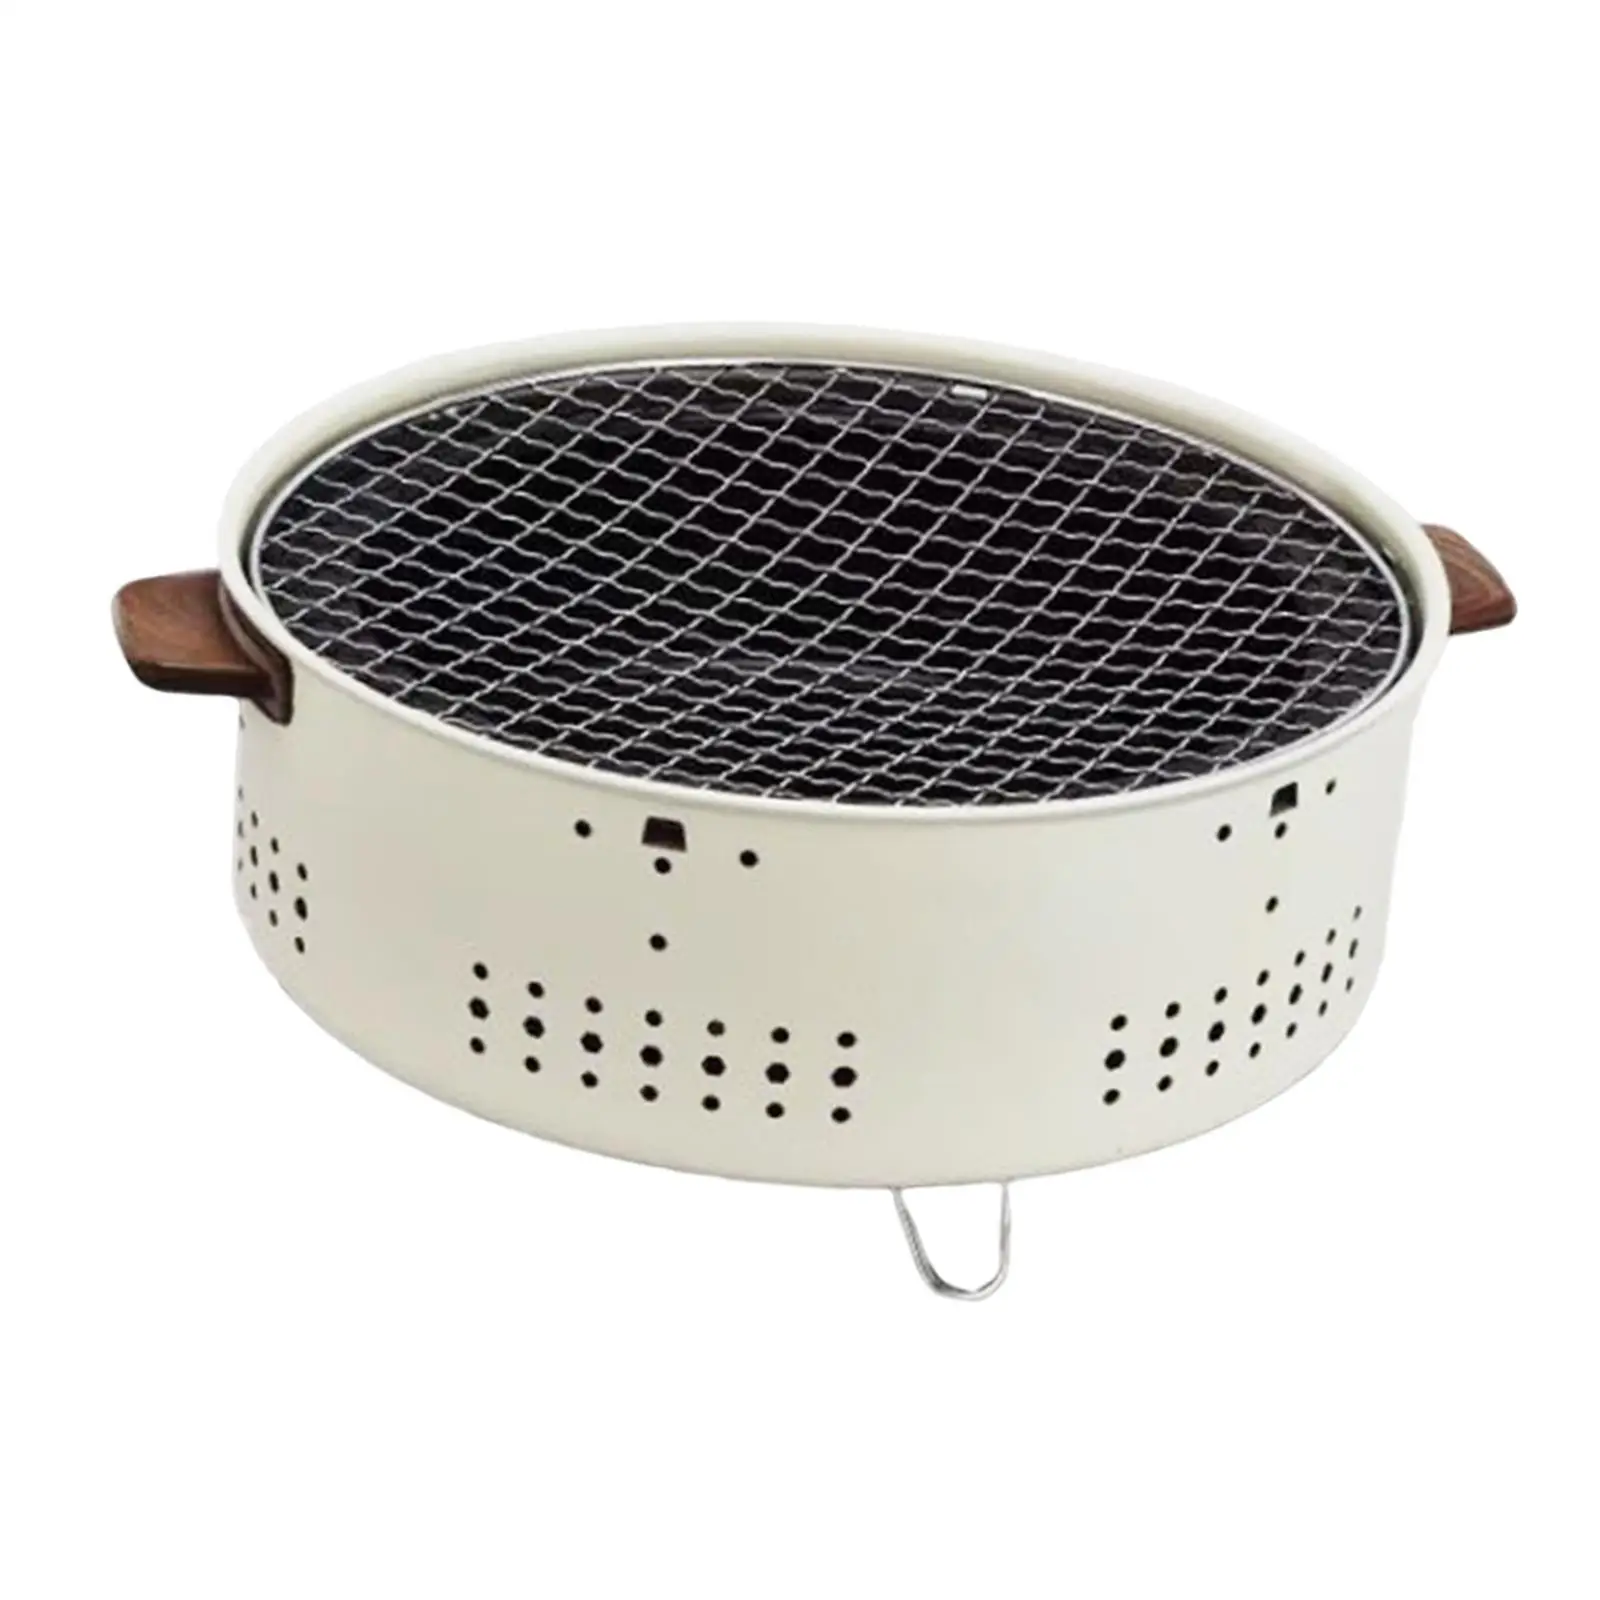 Tabletop Charcoal Barbecue Grills Picnic Grill Lightweight Practical Durable